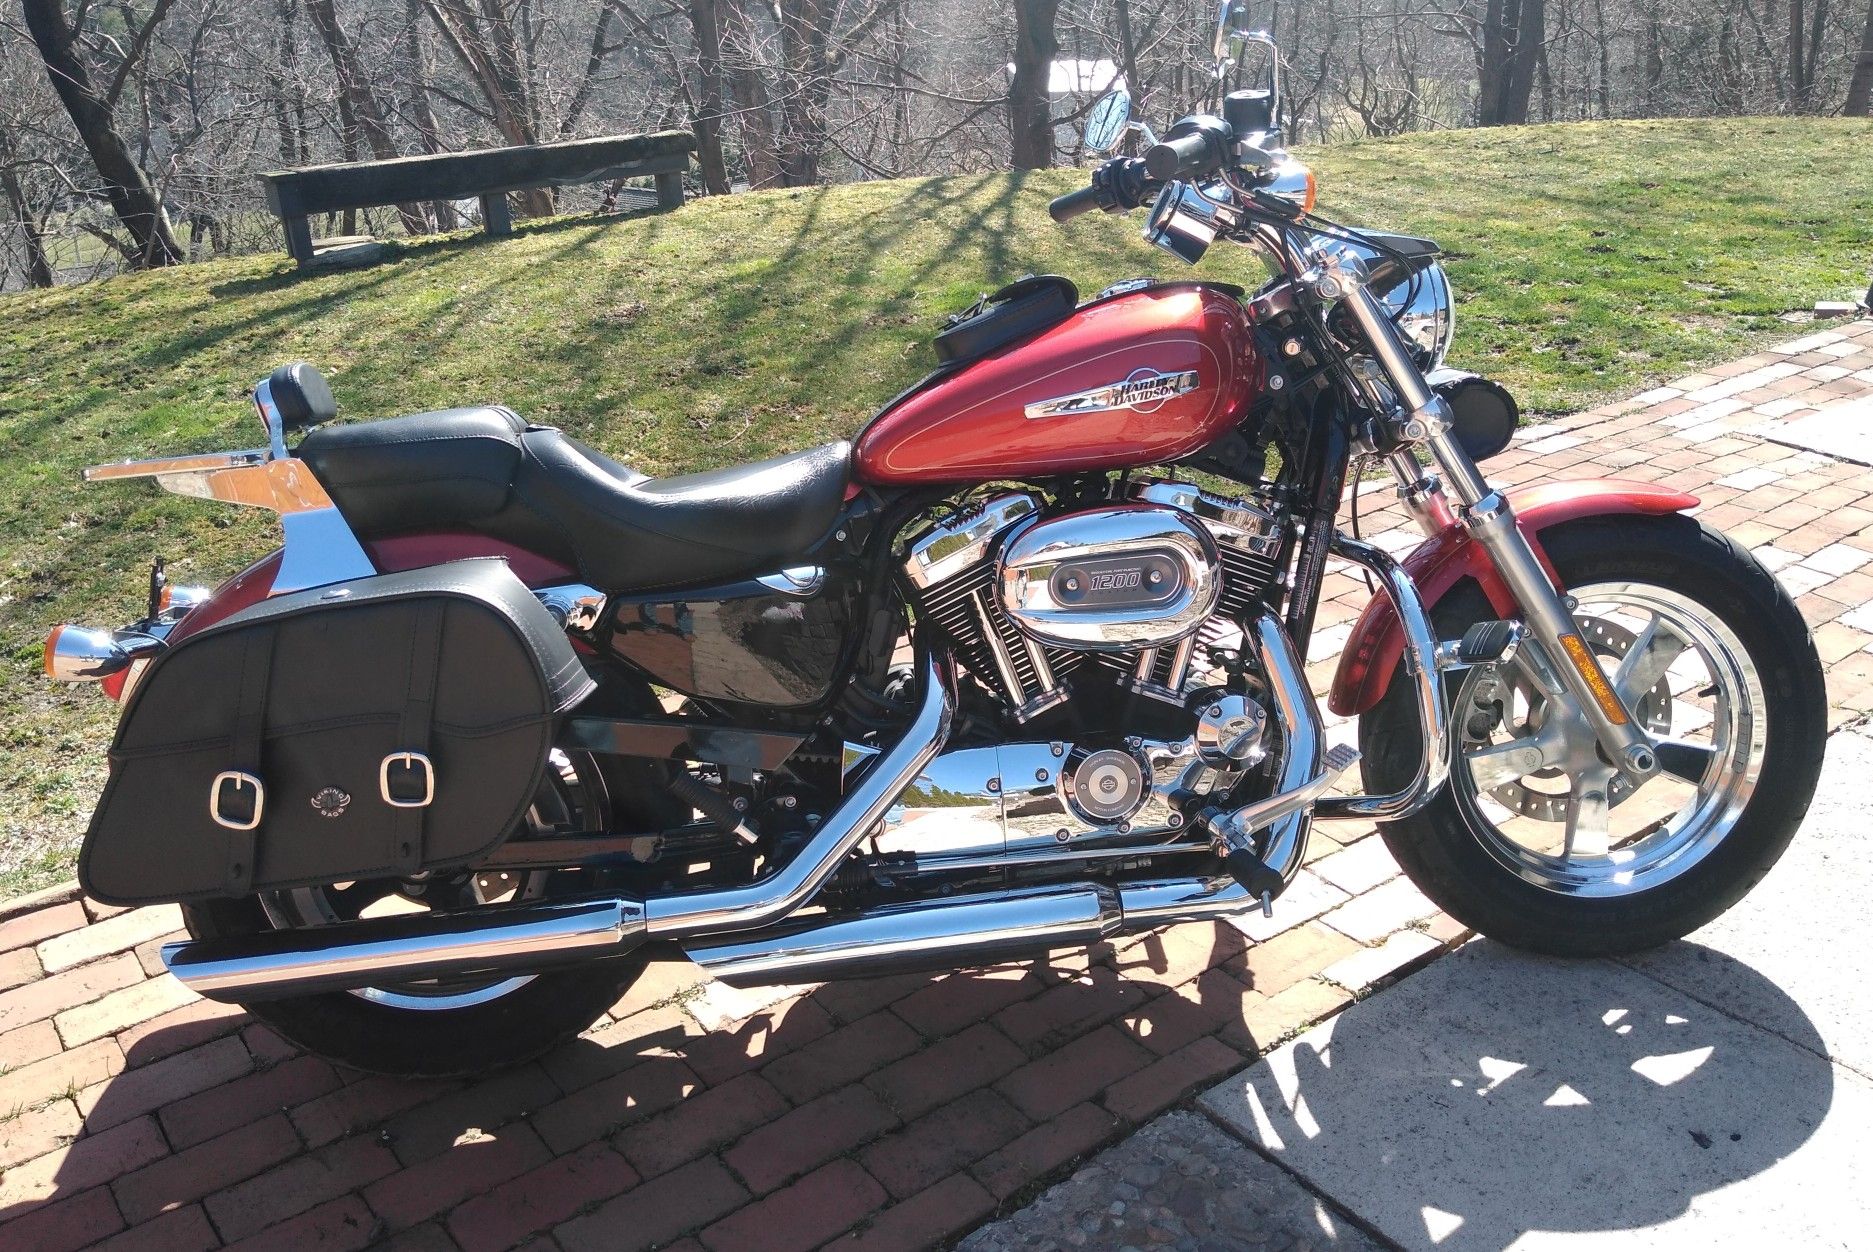 2014 Harley-Davidson XL 1200 Mint Condition low mileage bagger